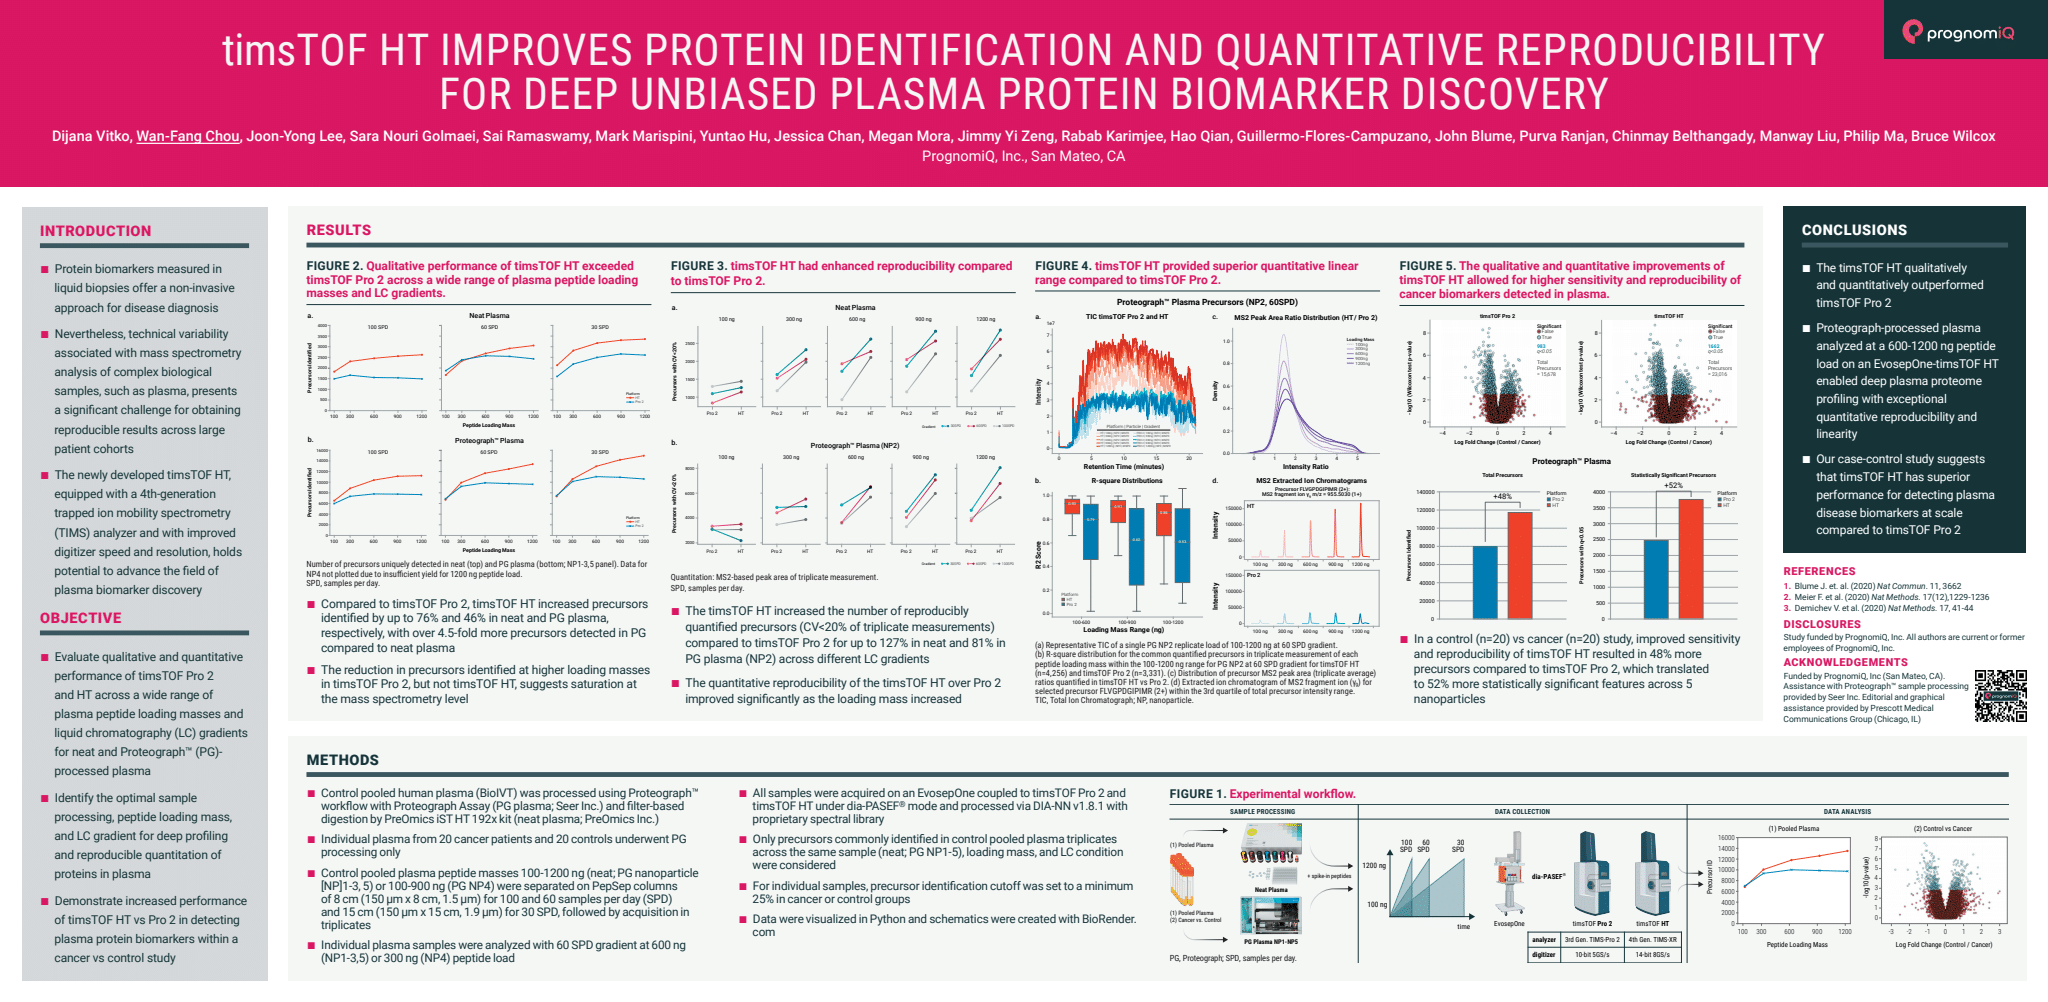 scientific poster showing that timstof ht improves protein identification and quantitative reproducibility for deep unbiased plasma protein biomarker discovery